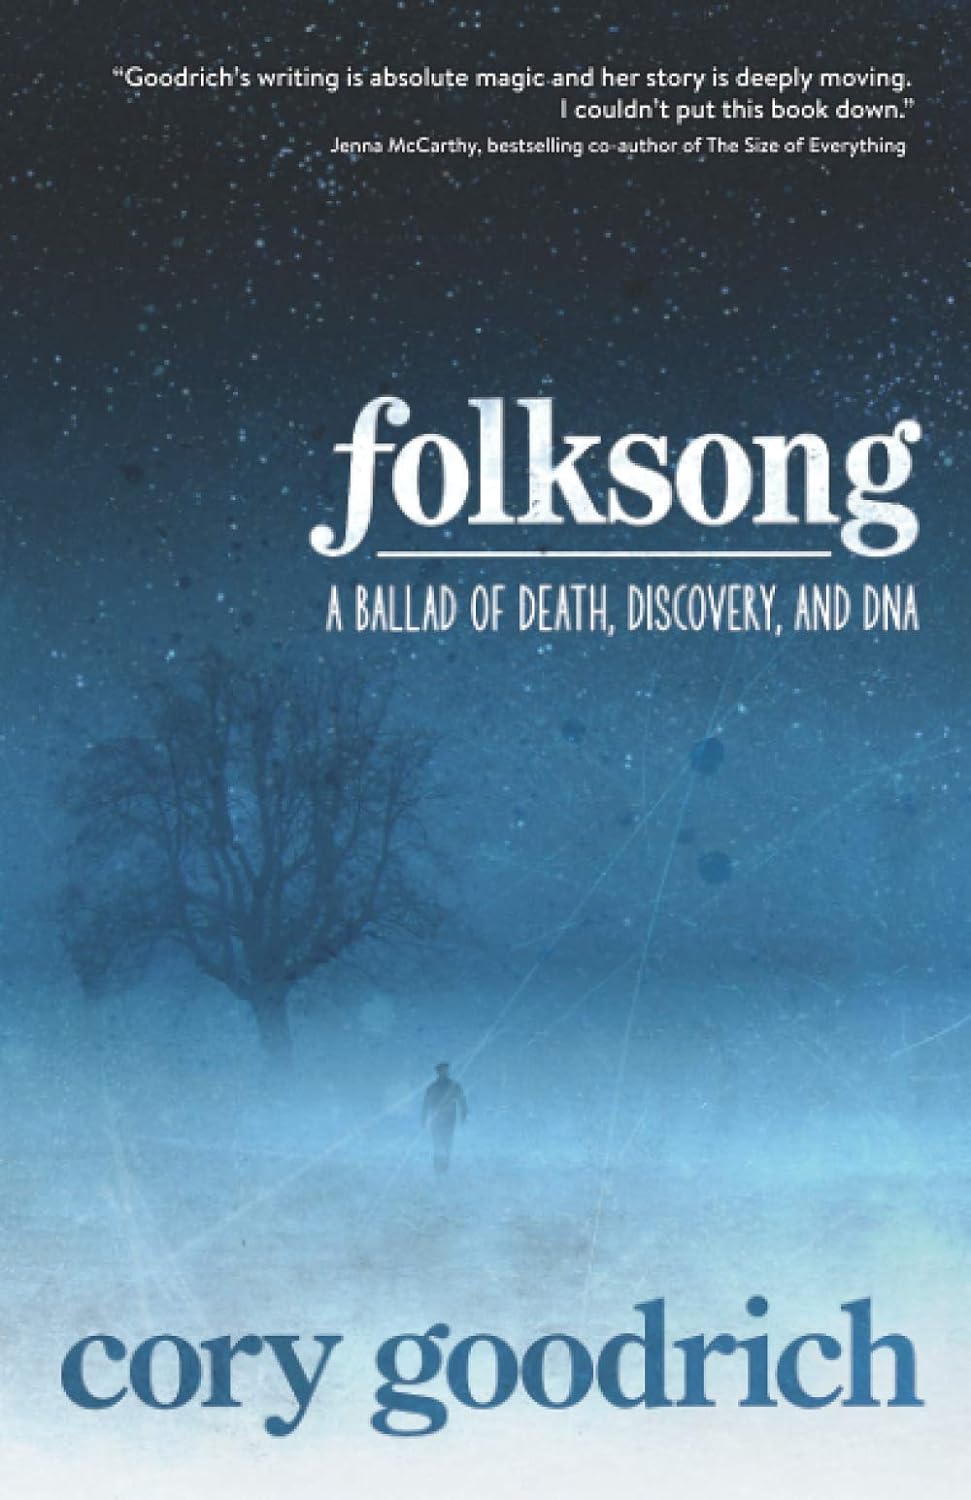 Folksong by Cory Goodrich